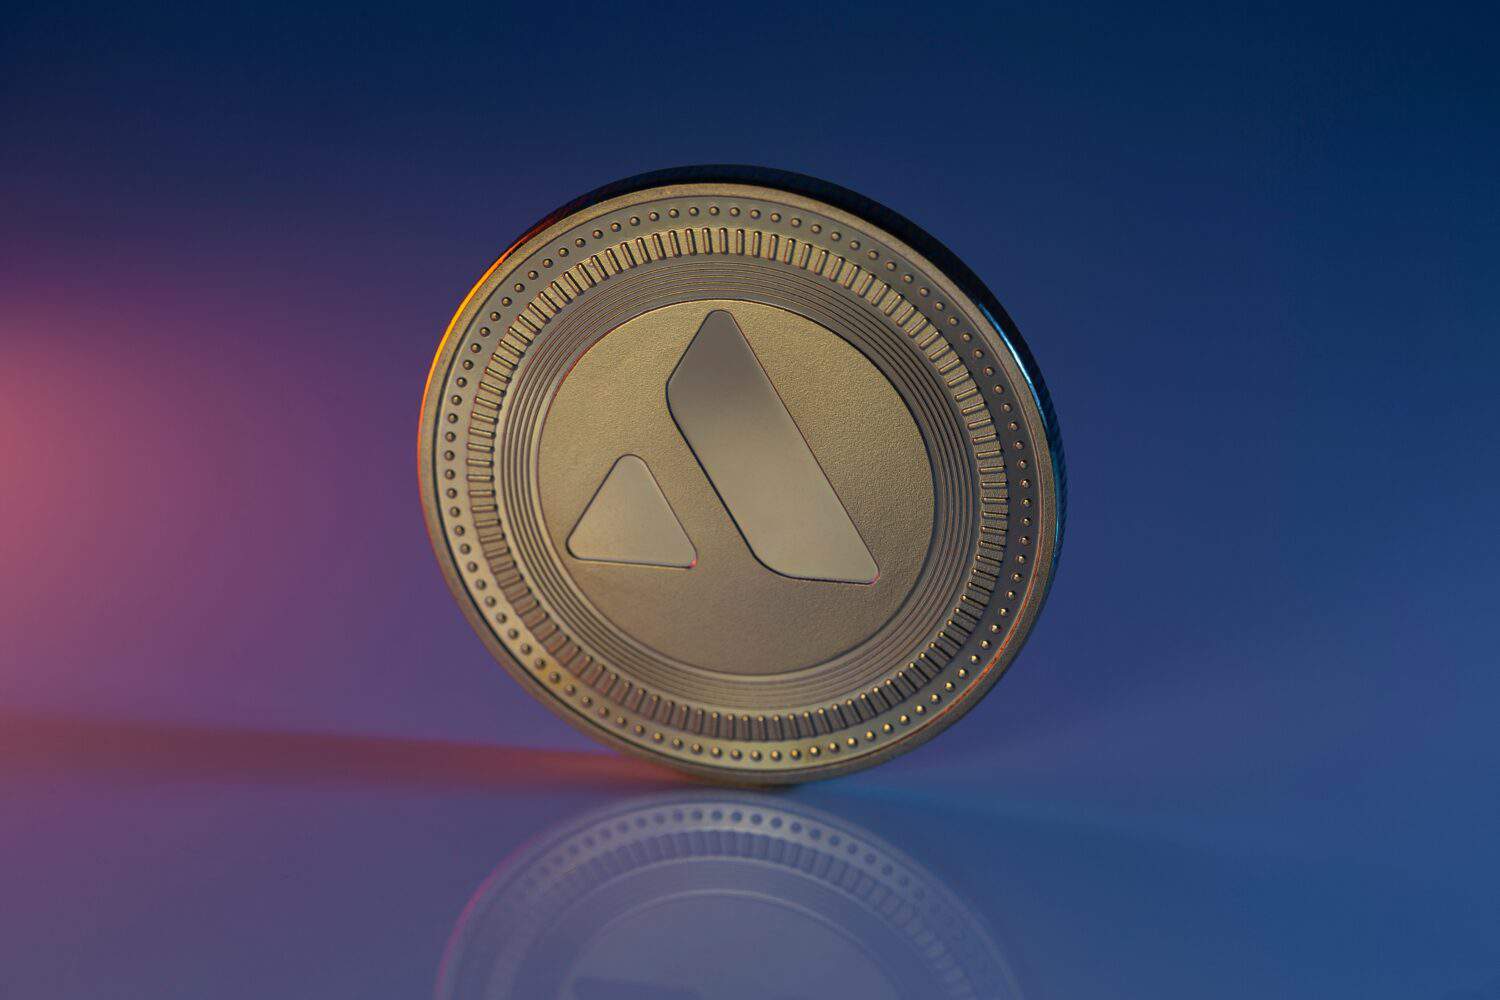 Avalanche AVAX Cryptocurrency Physical Coin Placed on reflective surface and lit with orange and blue lights.